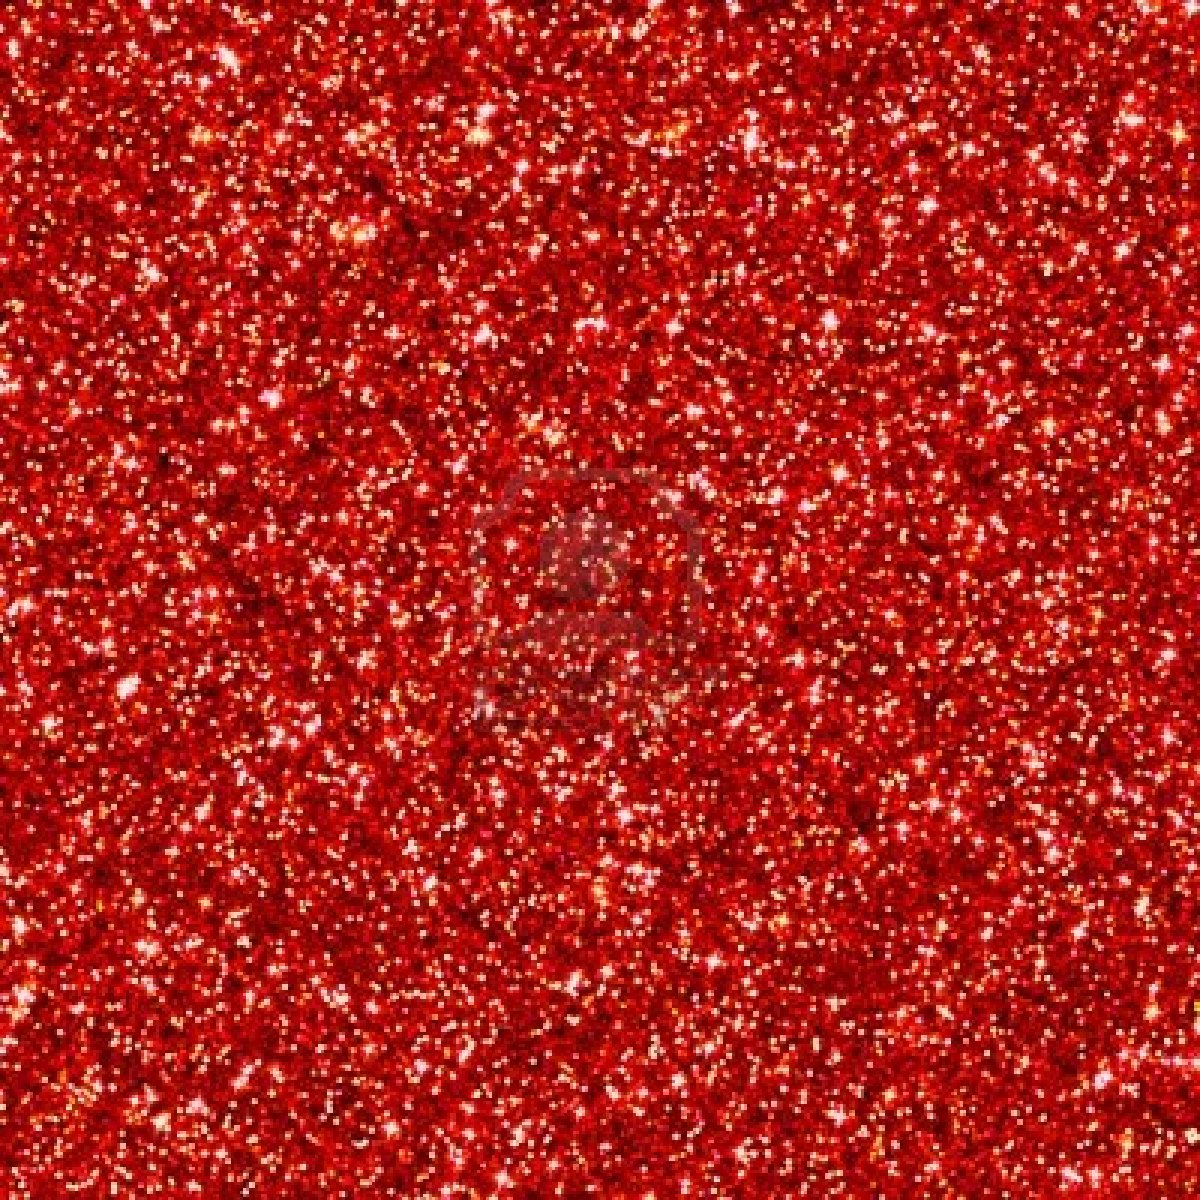 Red Glitter Texture For Background